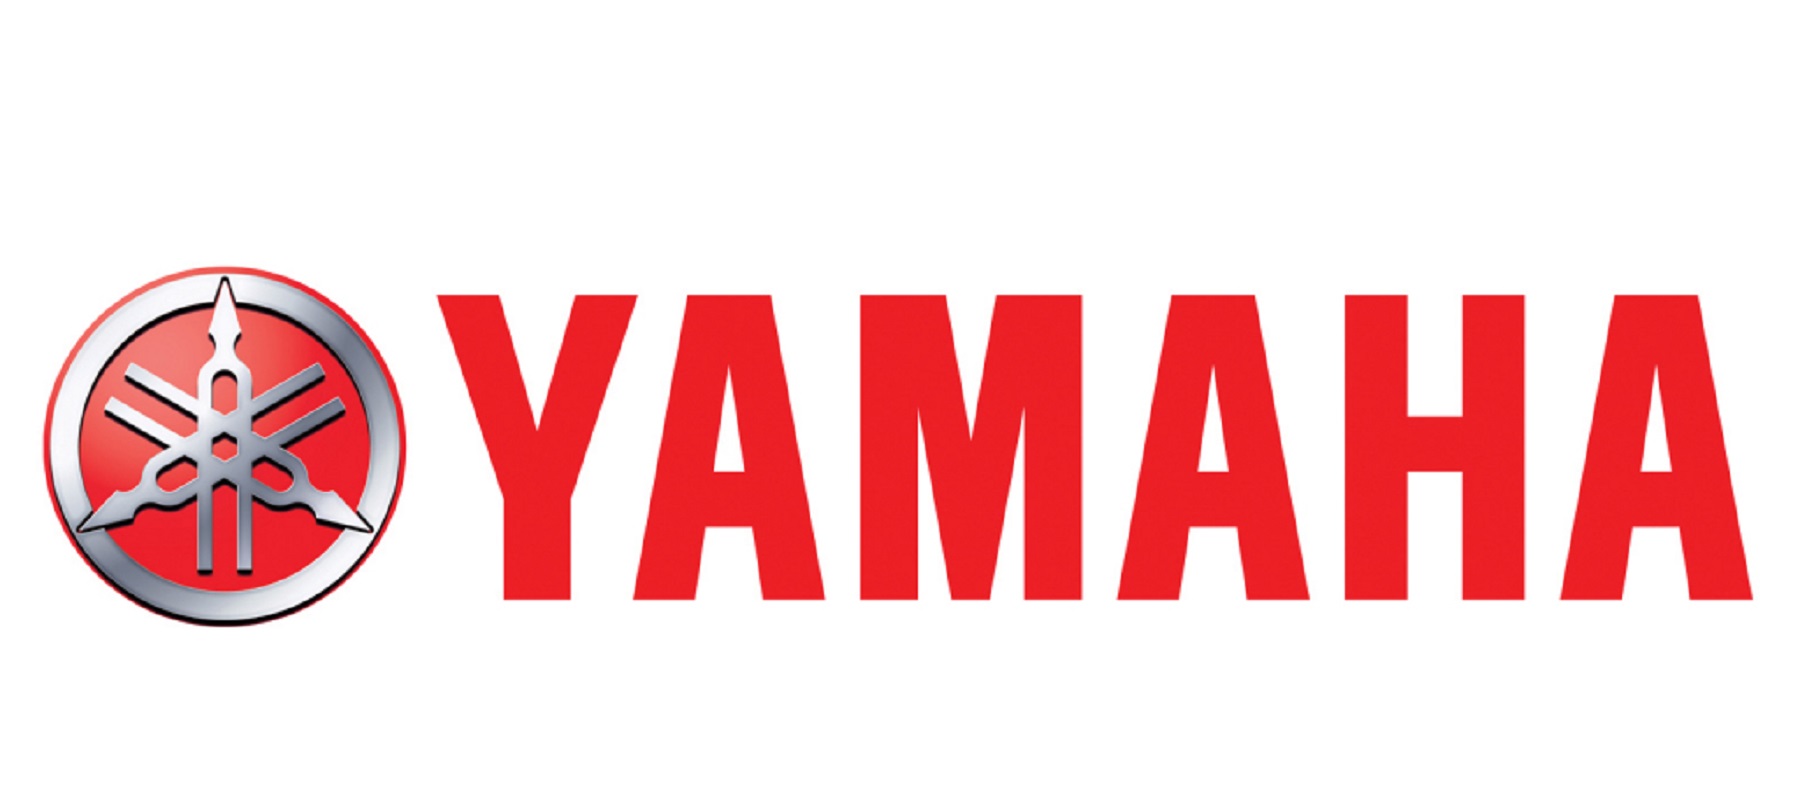 Yamaha Marine launches marketing campaign to share stories around the boating lifestyle